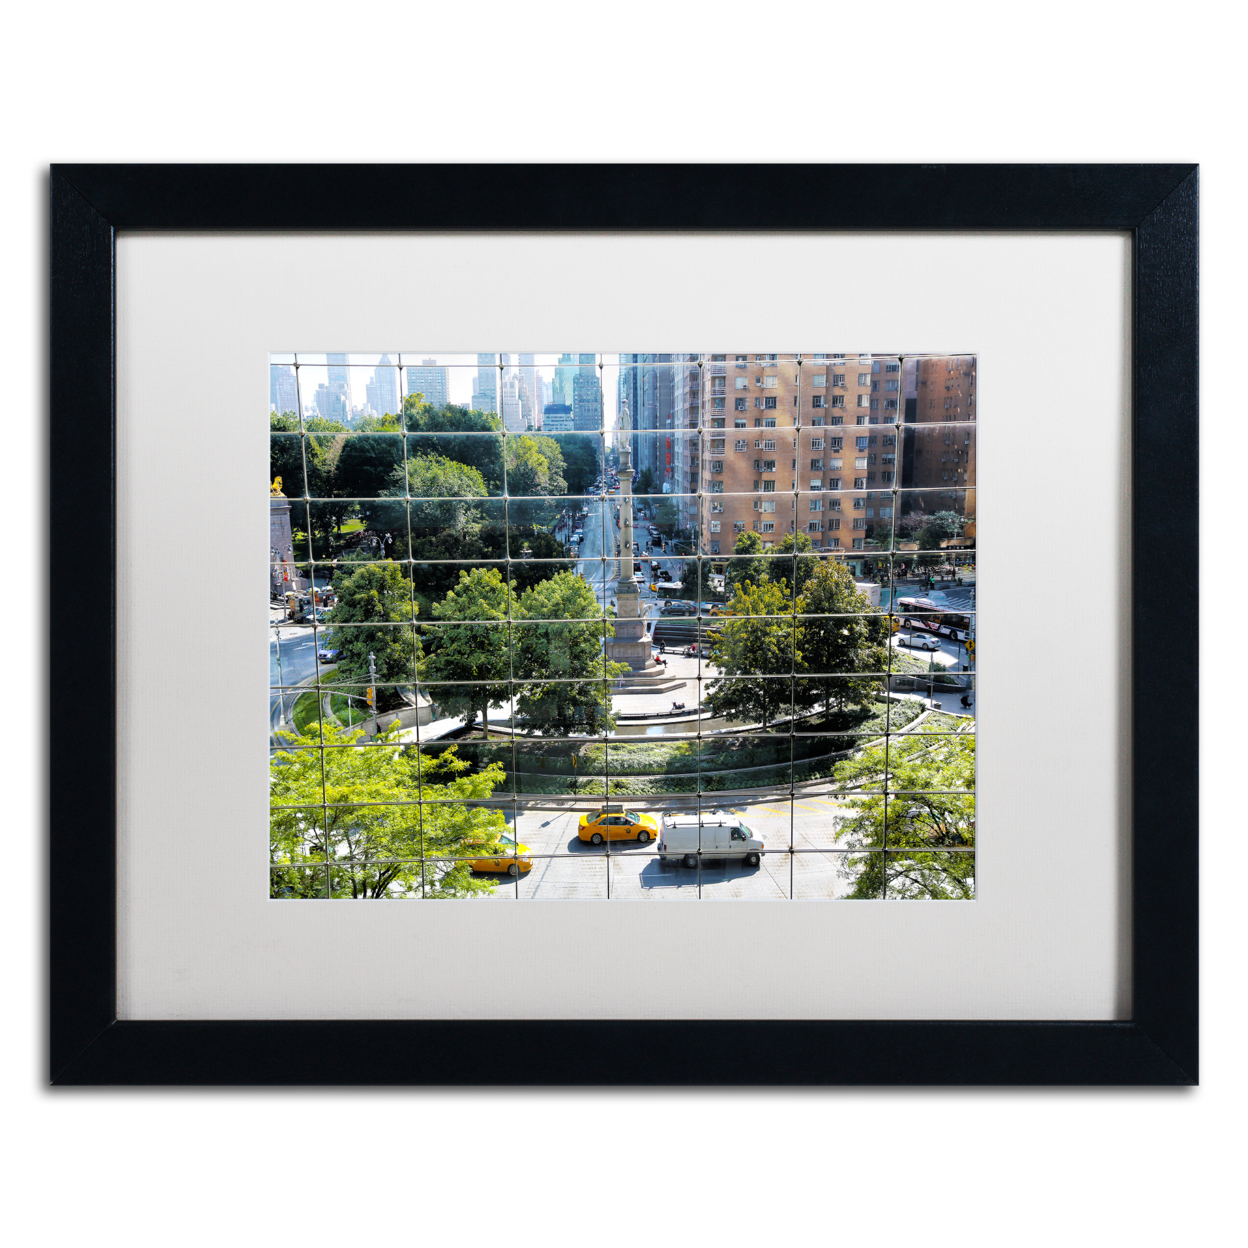 CATeyes 'Columbus Circle' Black Wooden Framed Art 18 X 22 Inches